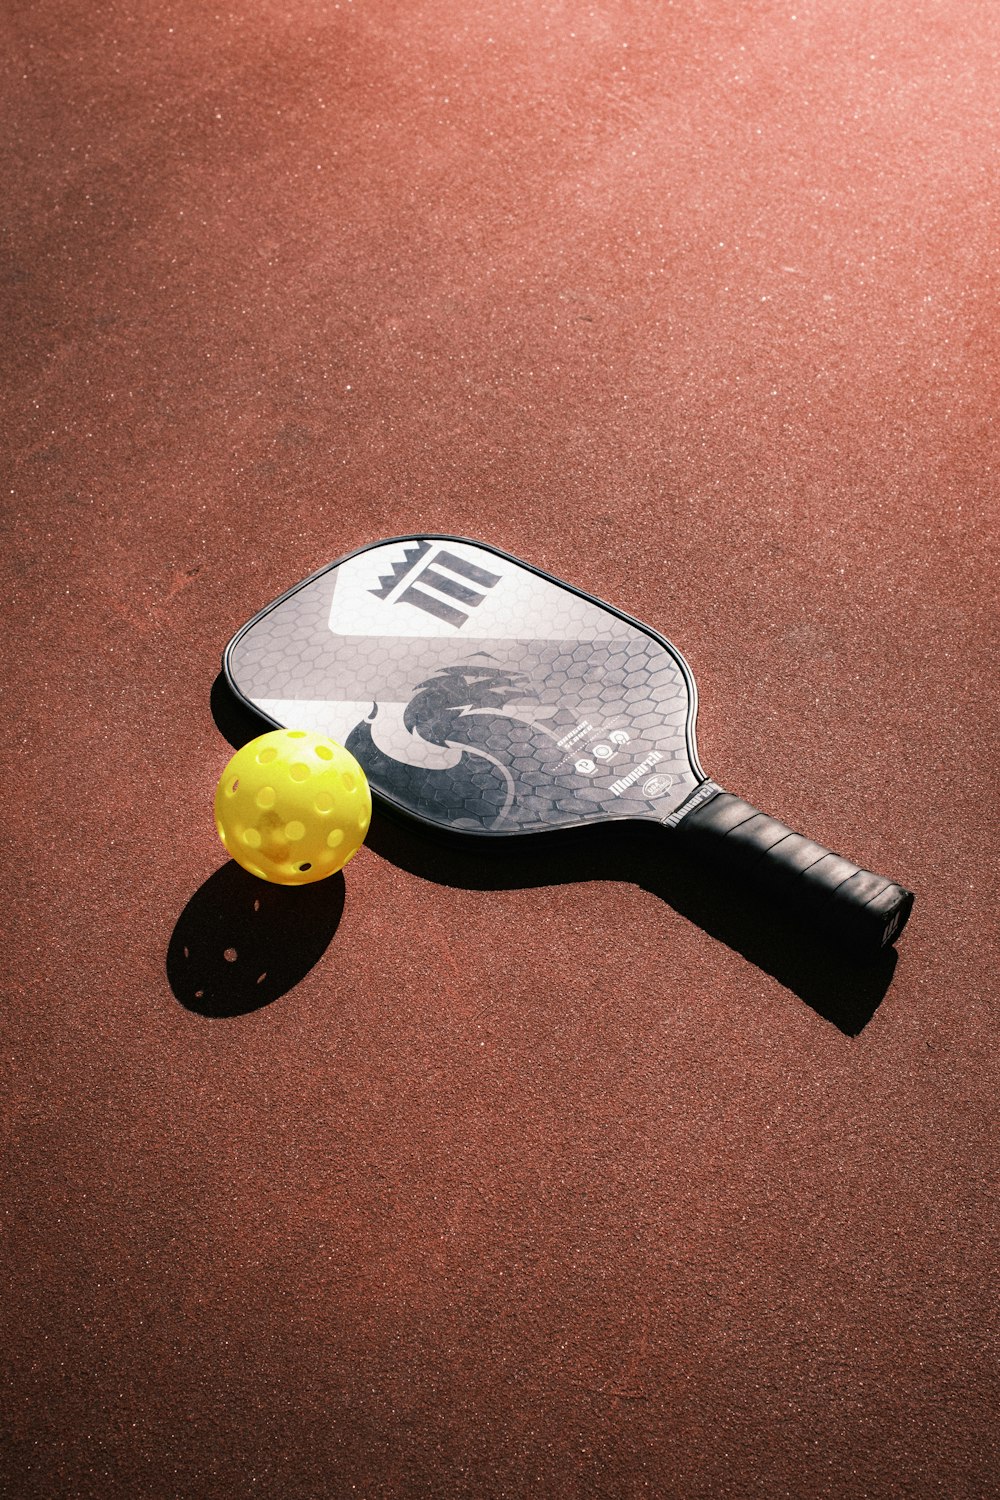 a tennis racket and ball on a court